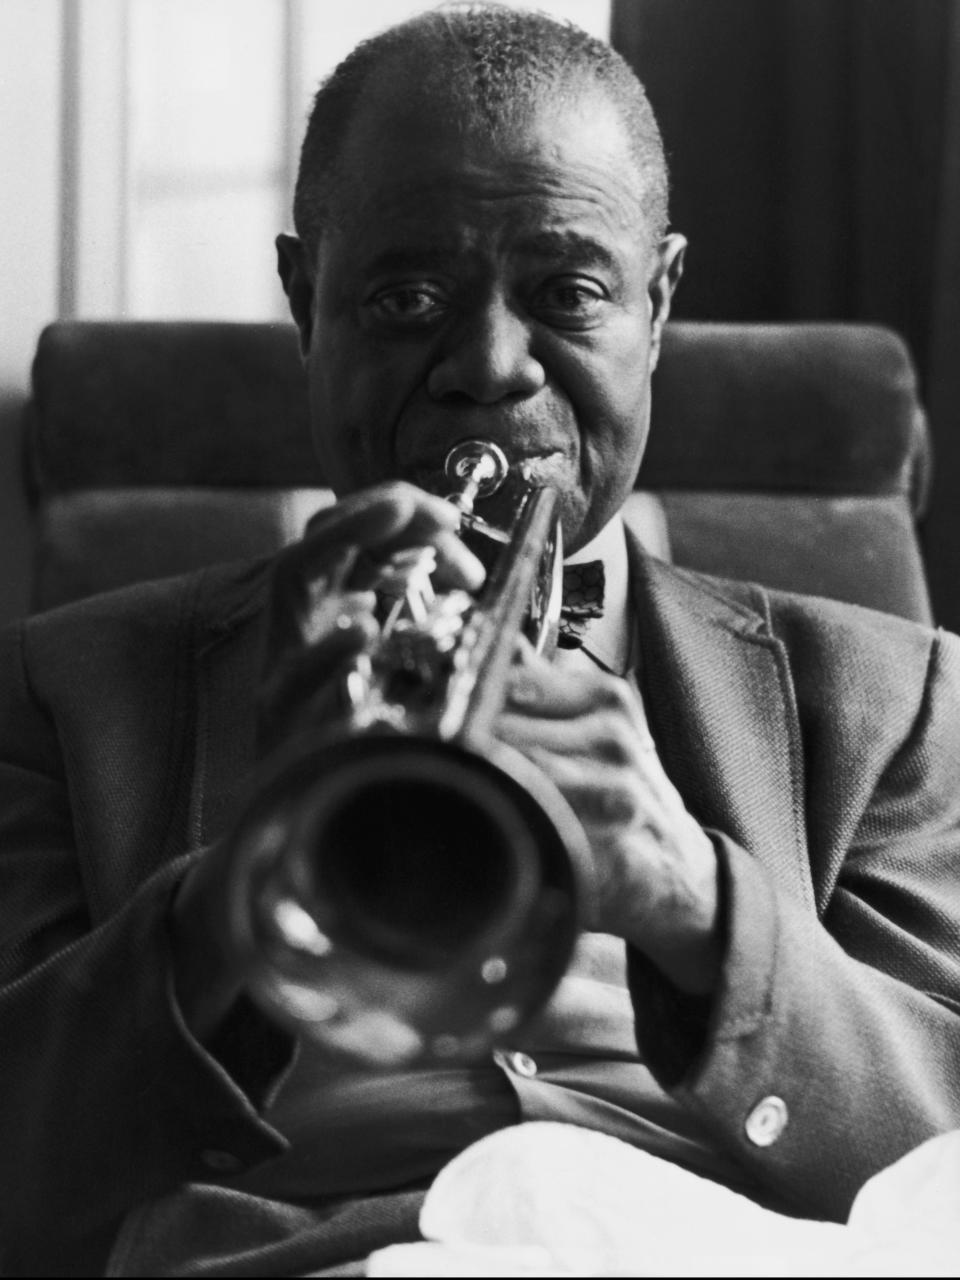 ‘His last nine months were tough’ – Louis Armstrong in 1970, the year before his death (Getty Images)